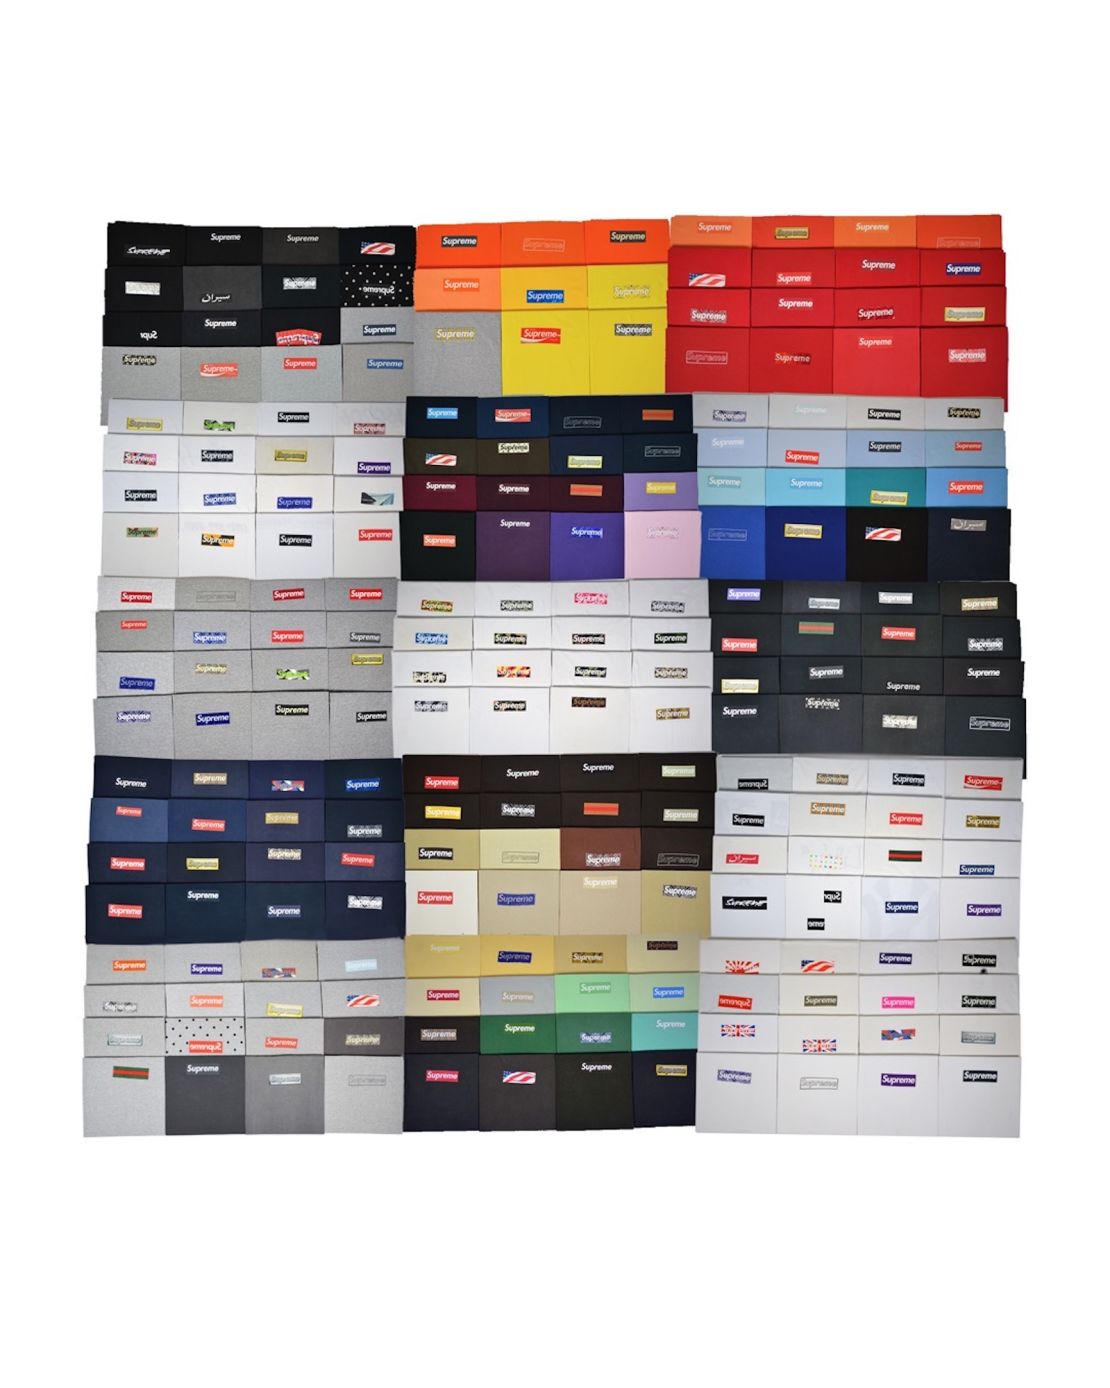 The Box Logo Collection contains 253 shirts spanning Supreme's entire brand history.